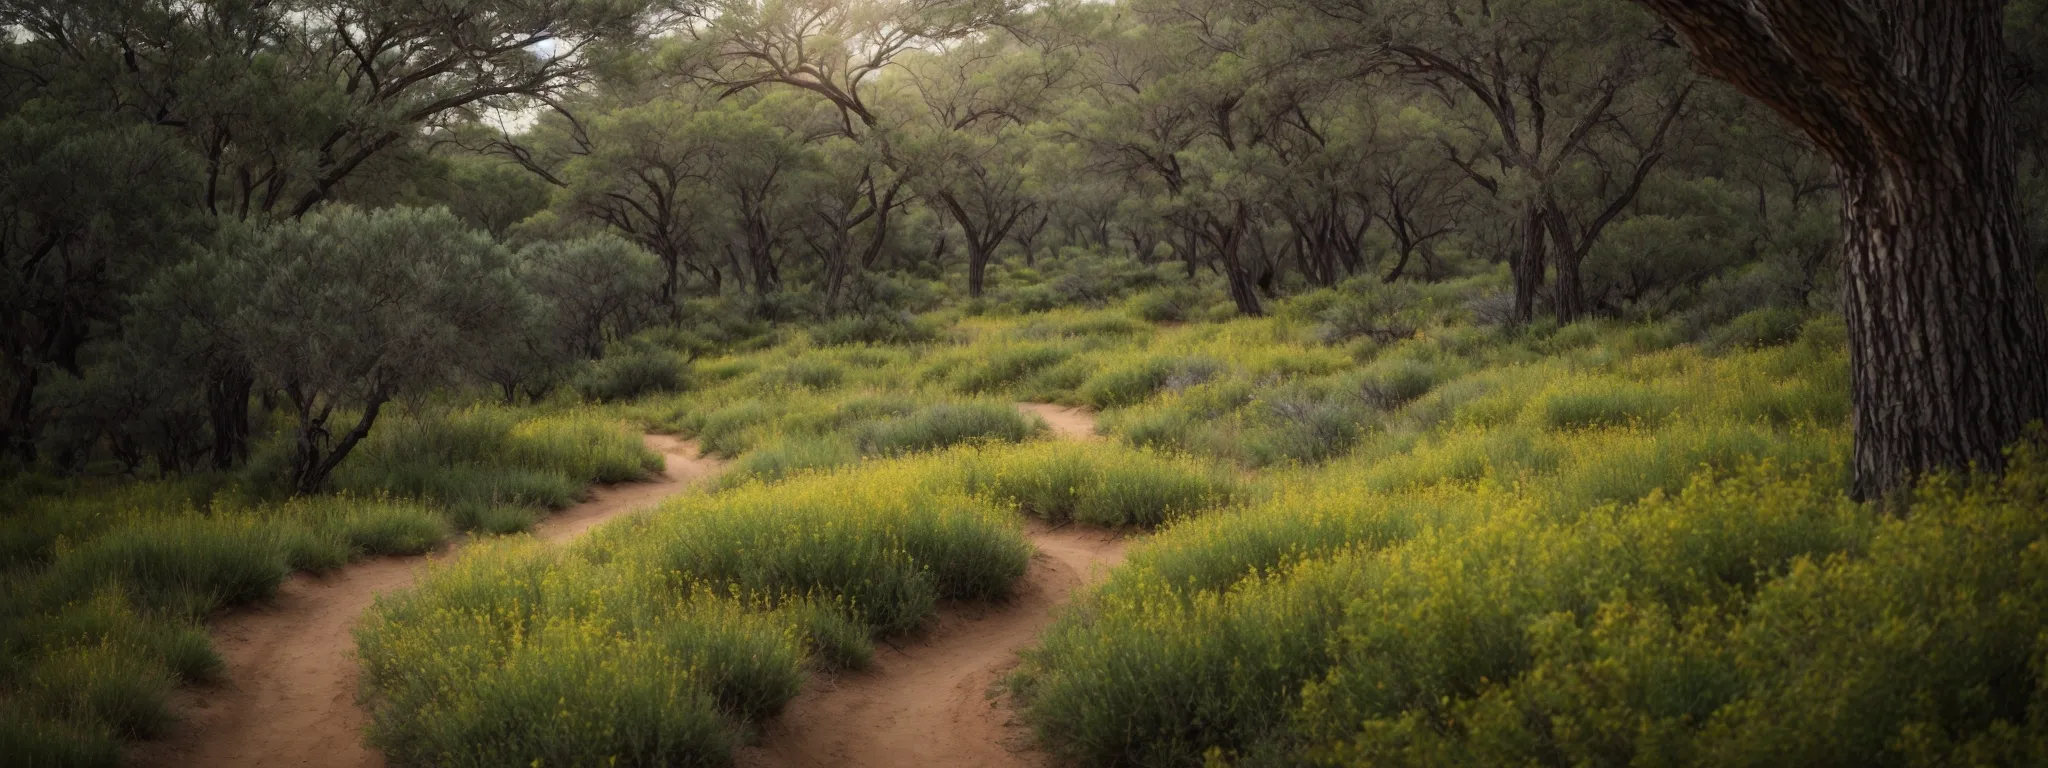 a path winding out of a barren desert into a lush, vibrant forest.